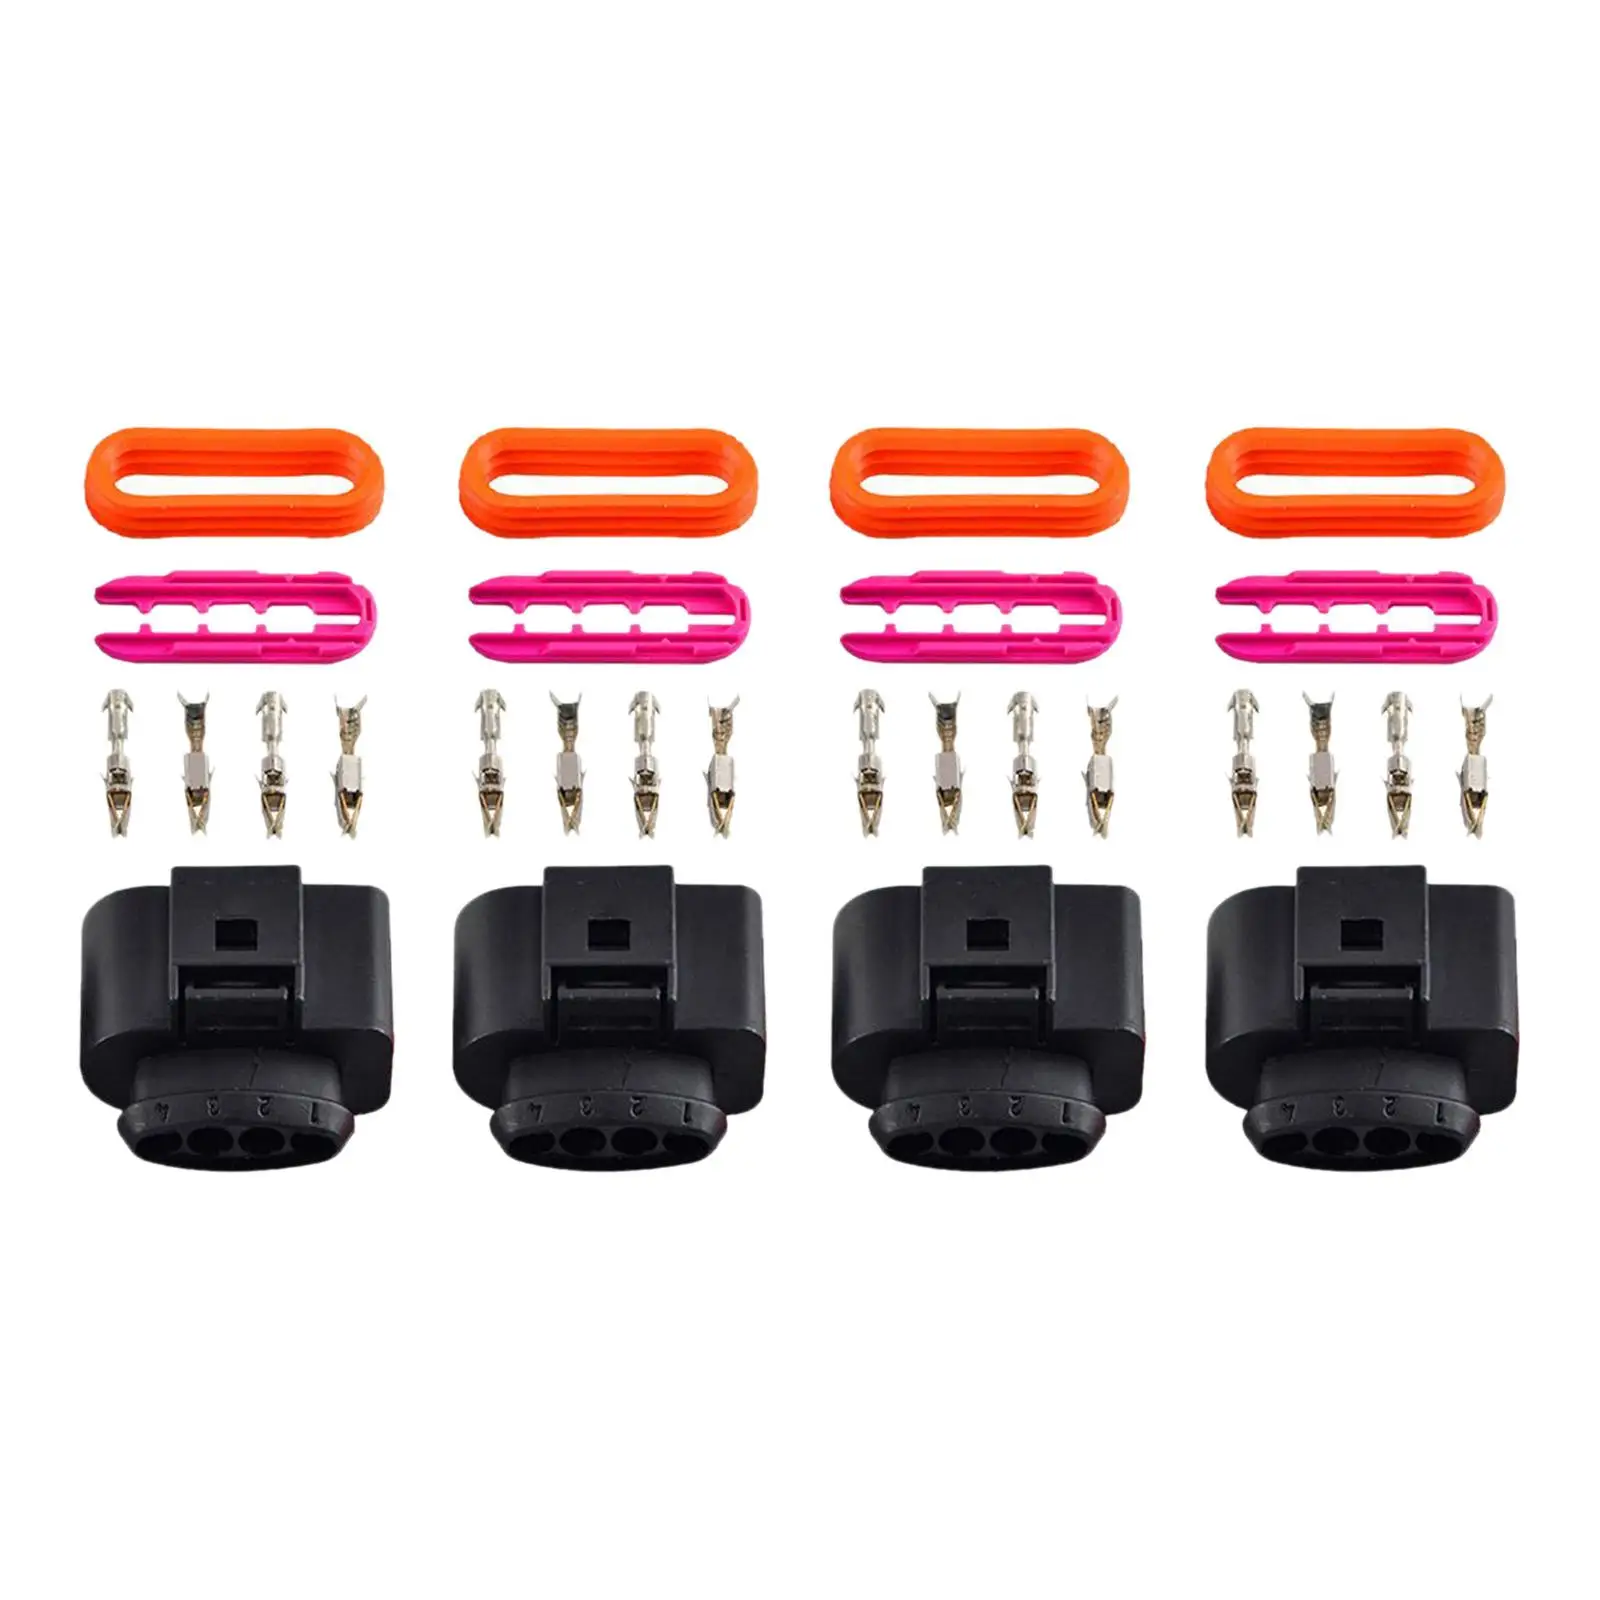 4x Ignition Coil Connector Plug Wiring Harness Connector Repair Kit Durable Portable for A4 A8 A6 Replacement Car Accessory